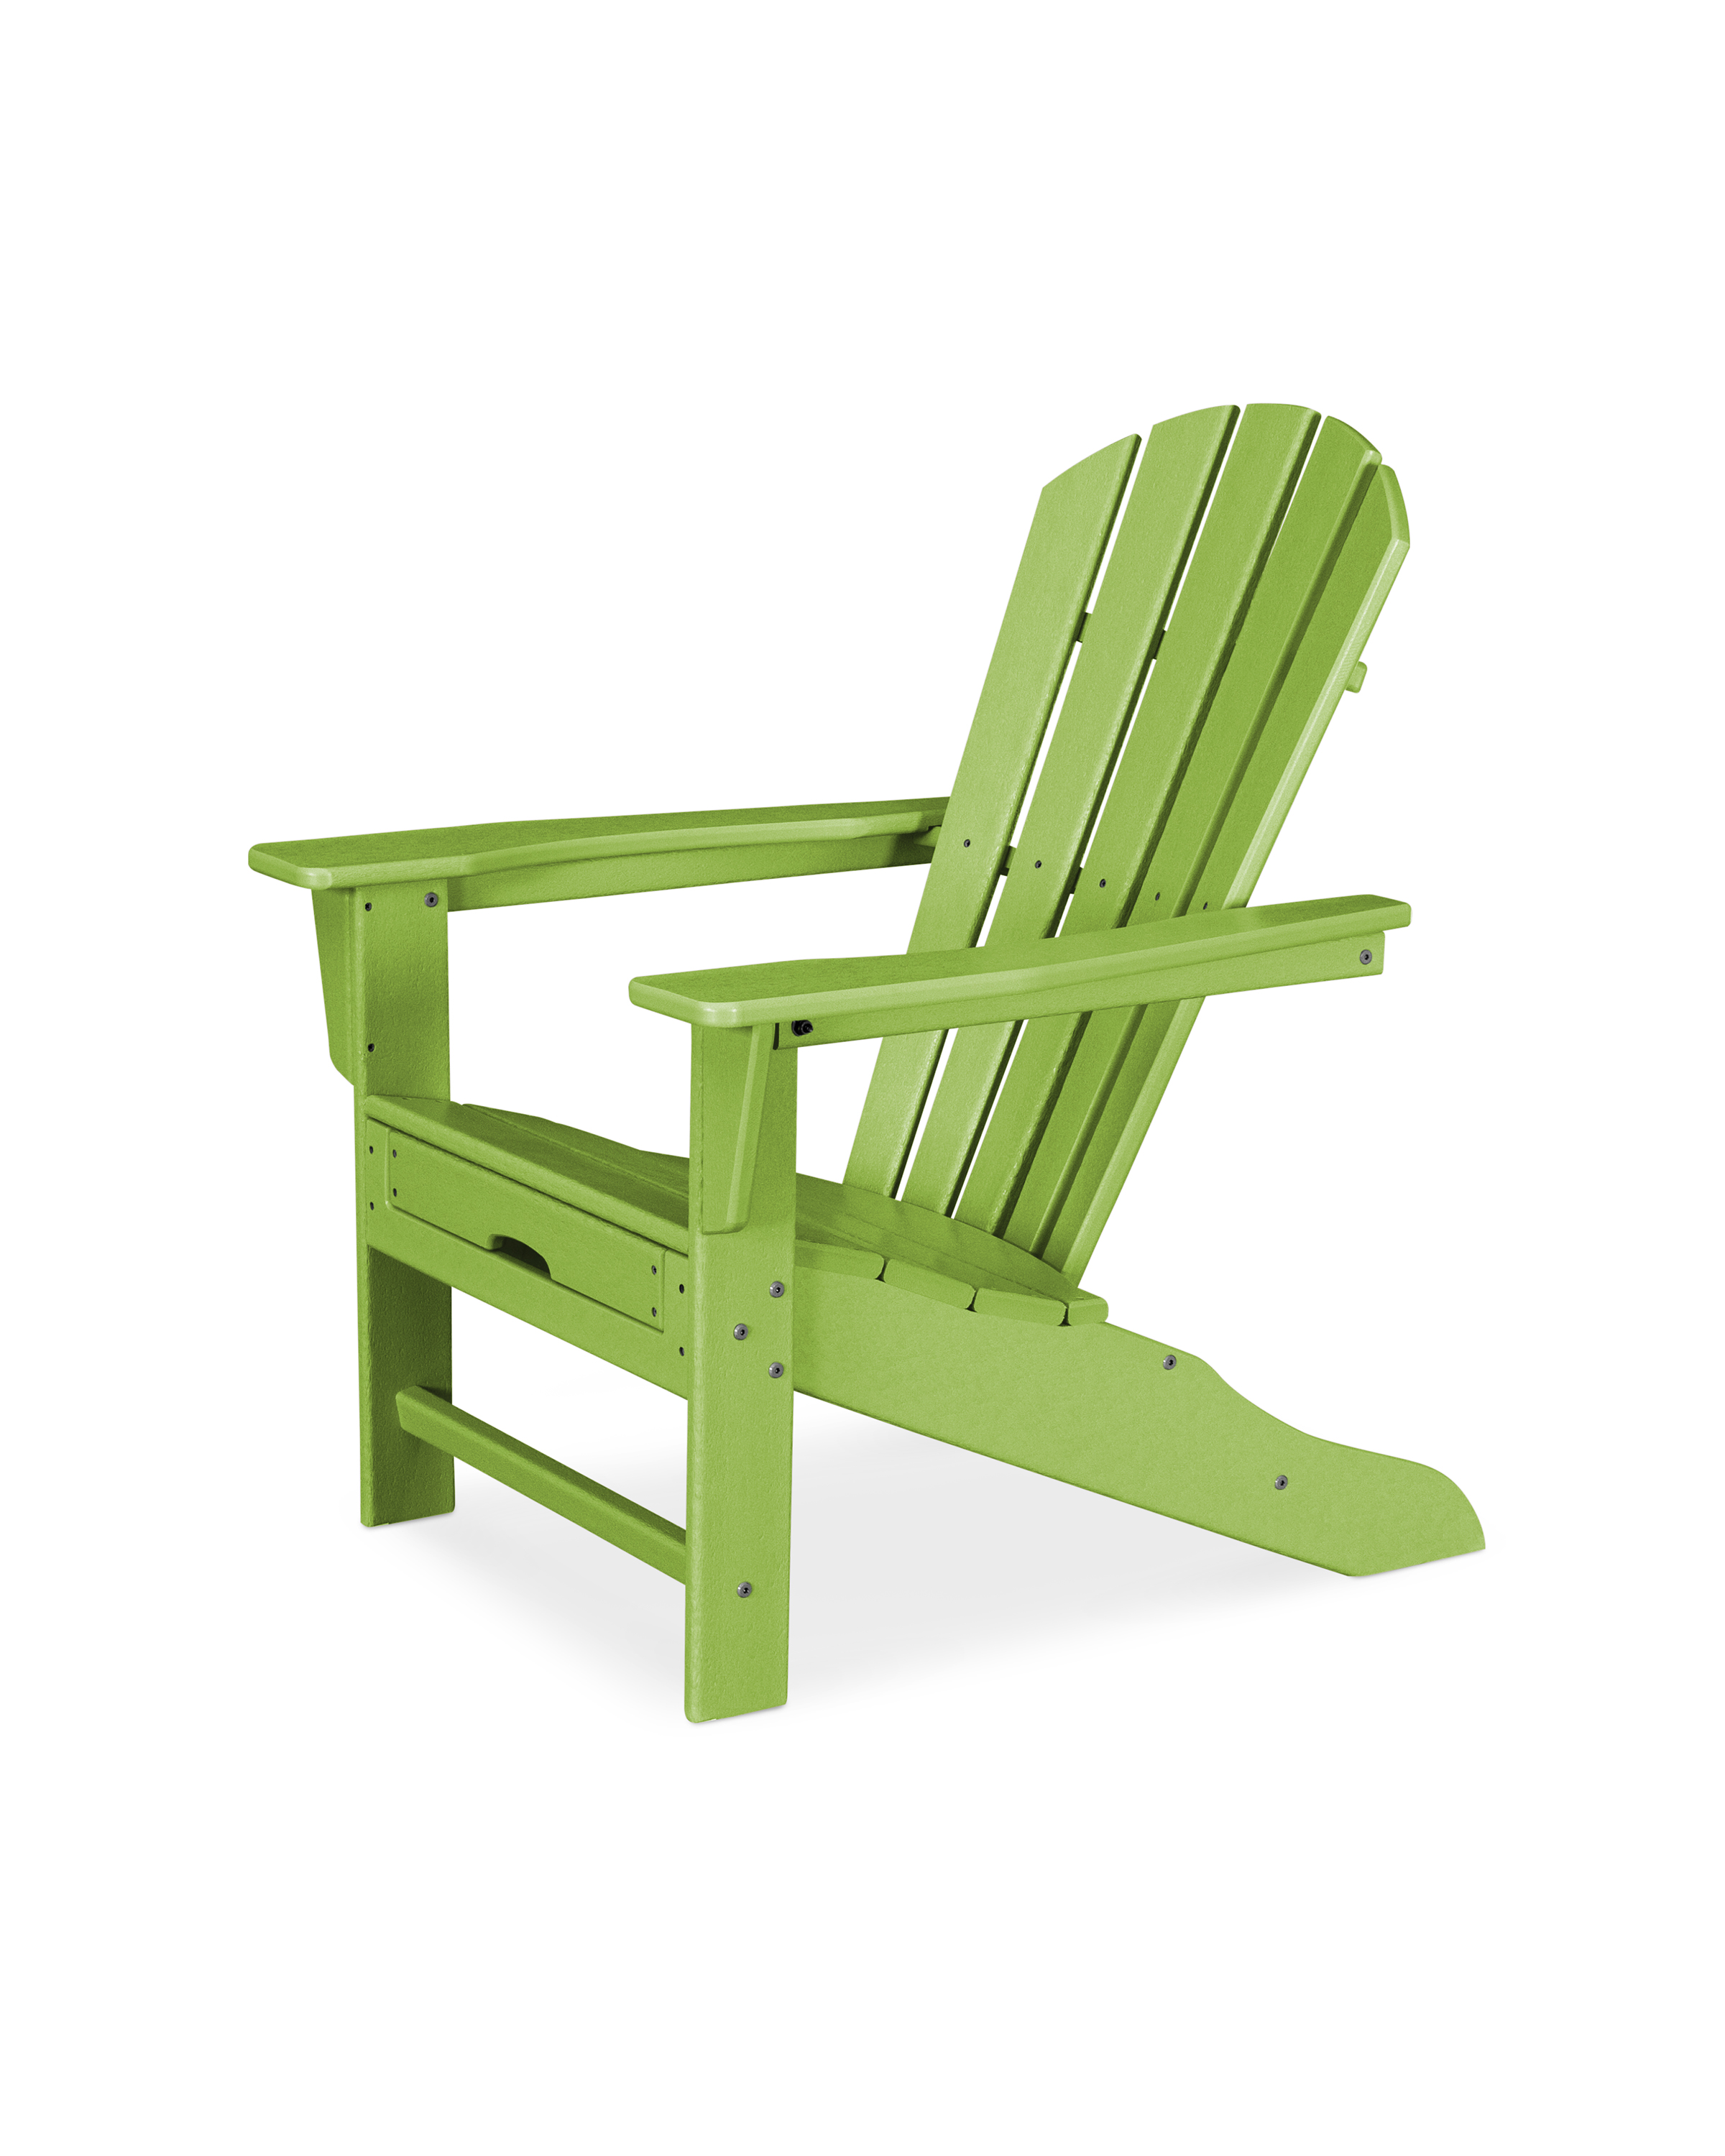 palm coast ultimate adirondack with hideaway ottoman in lime thumbnail image